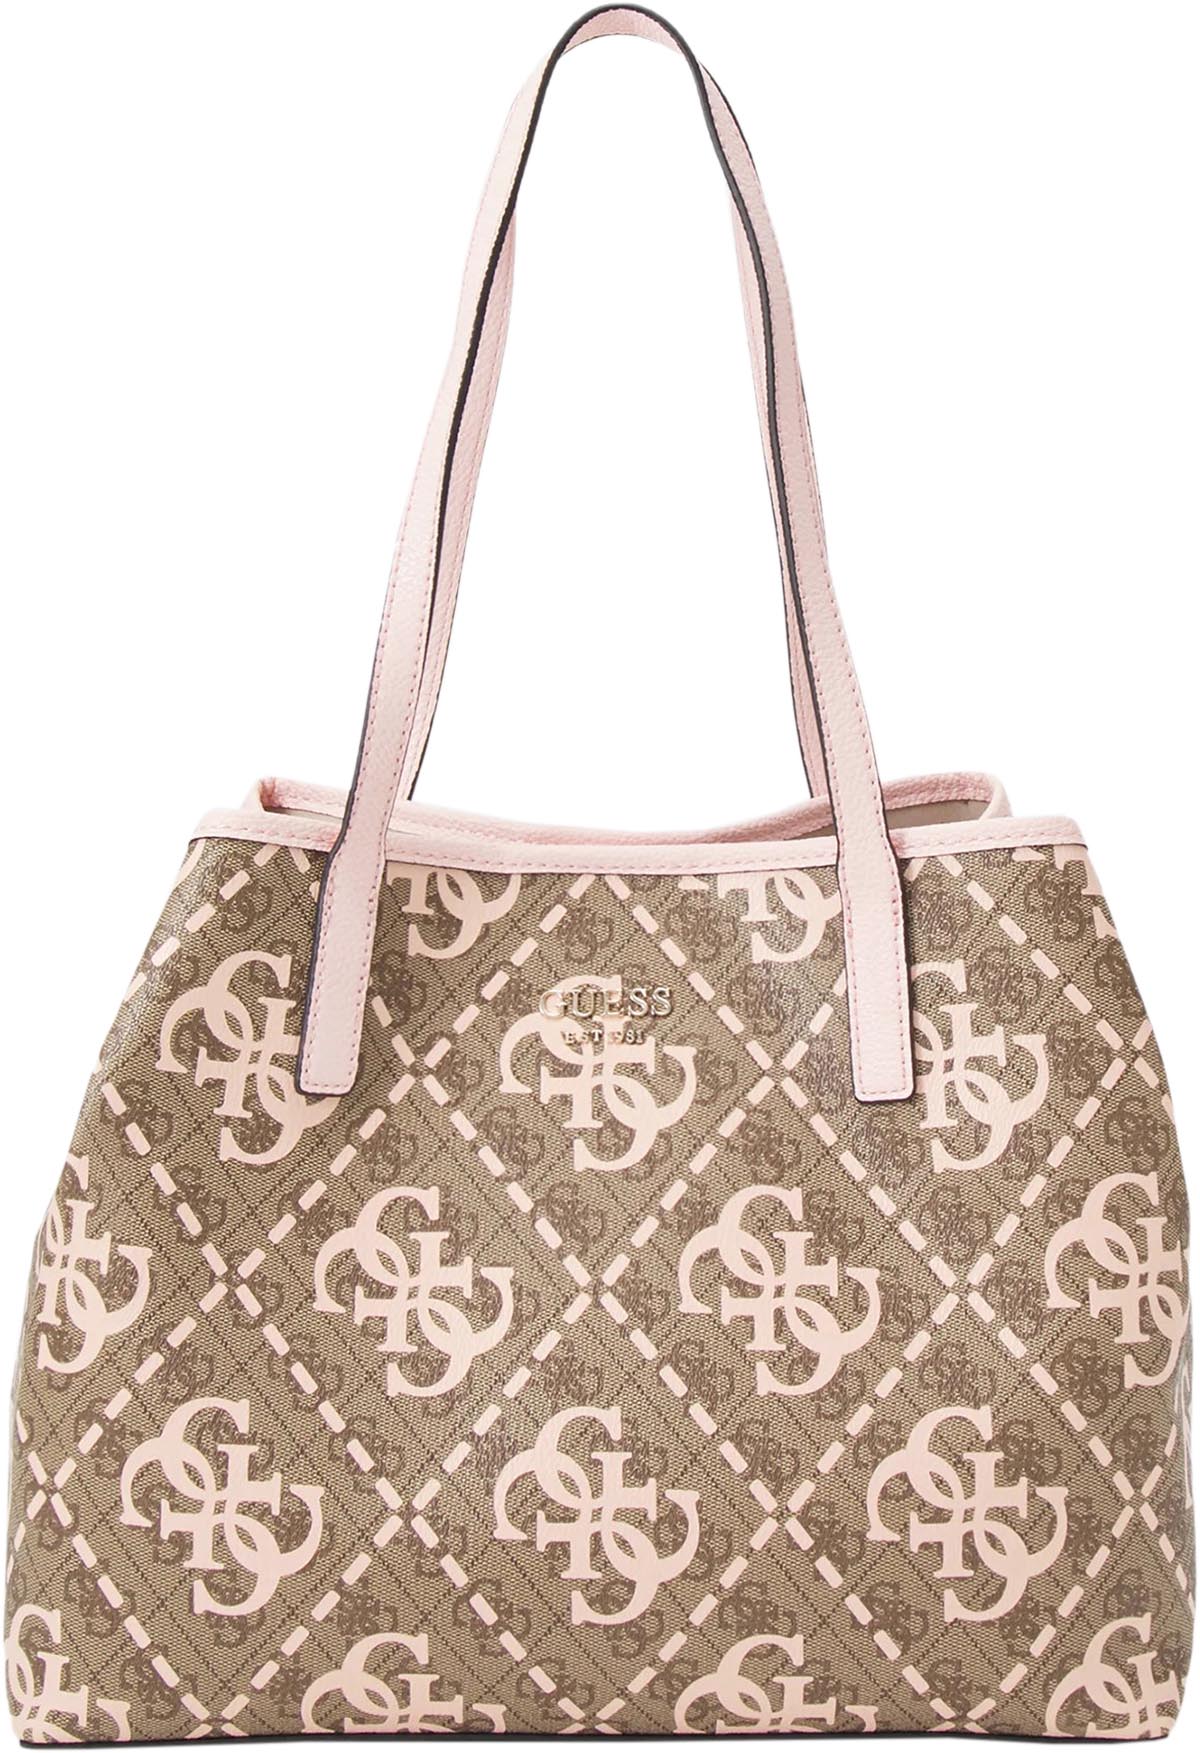 Guess Vikky Large Tote Pale Rose, Tote